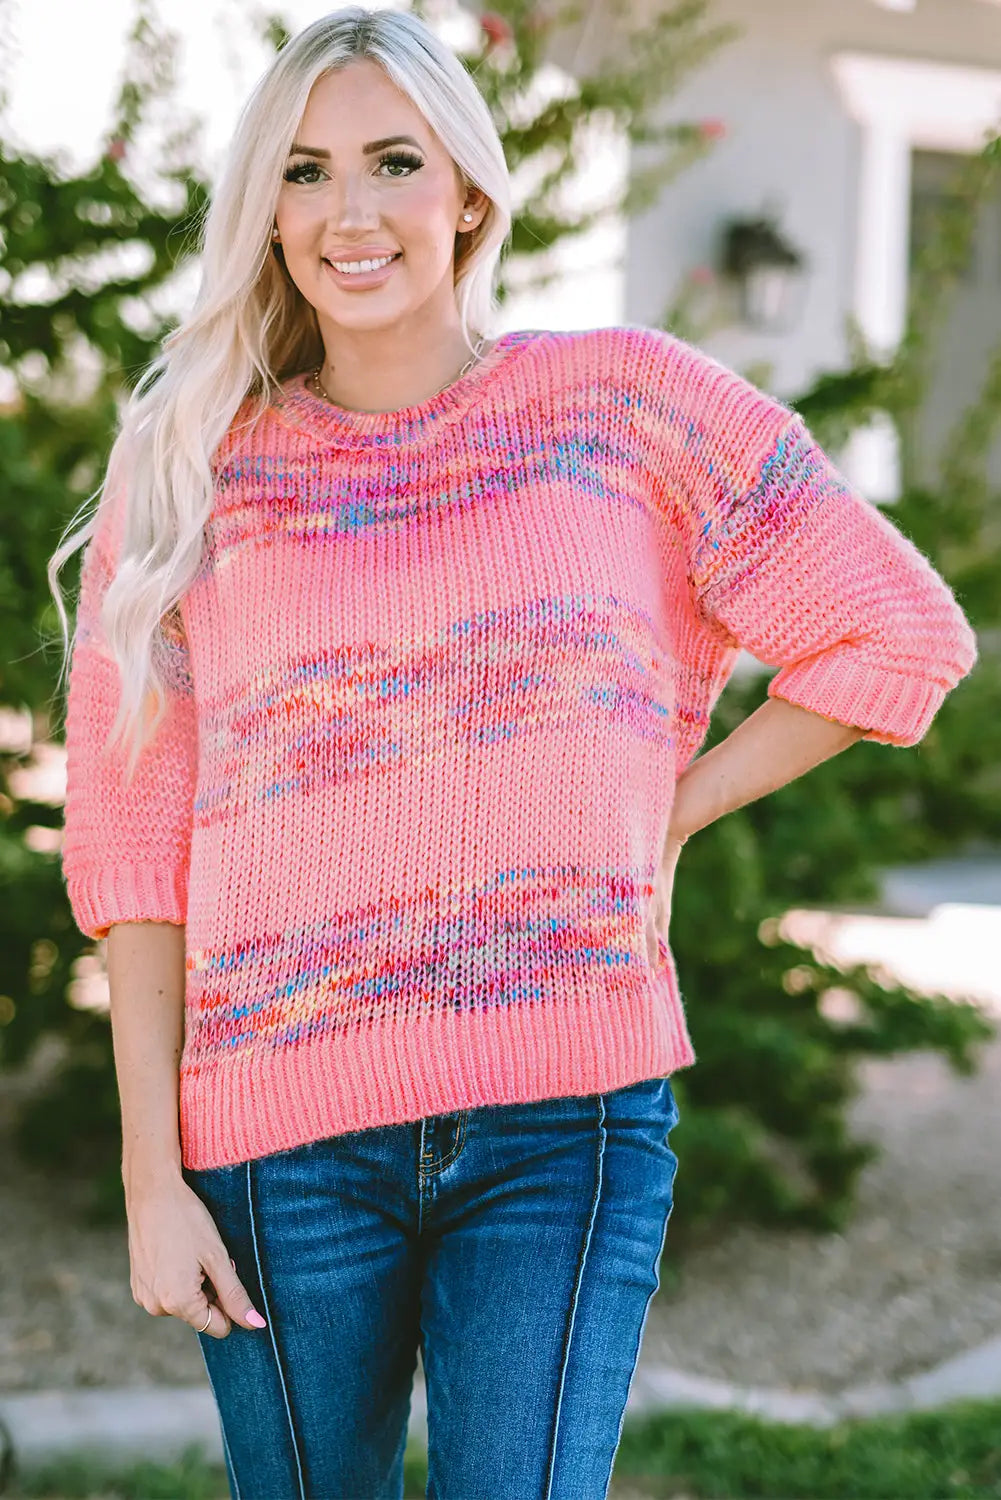 Rose colorful stripes 3/4 sleeve loose sweater - s / 100% acrylic - sweaters & cardigans